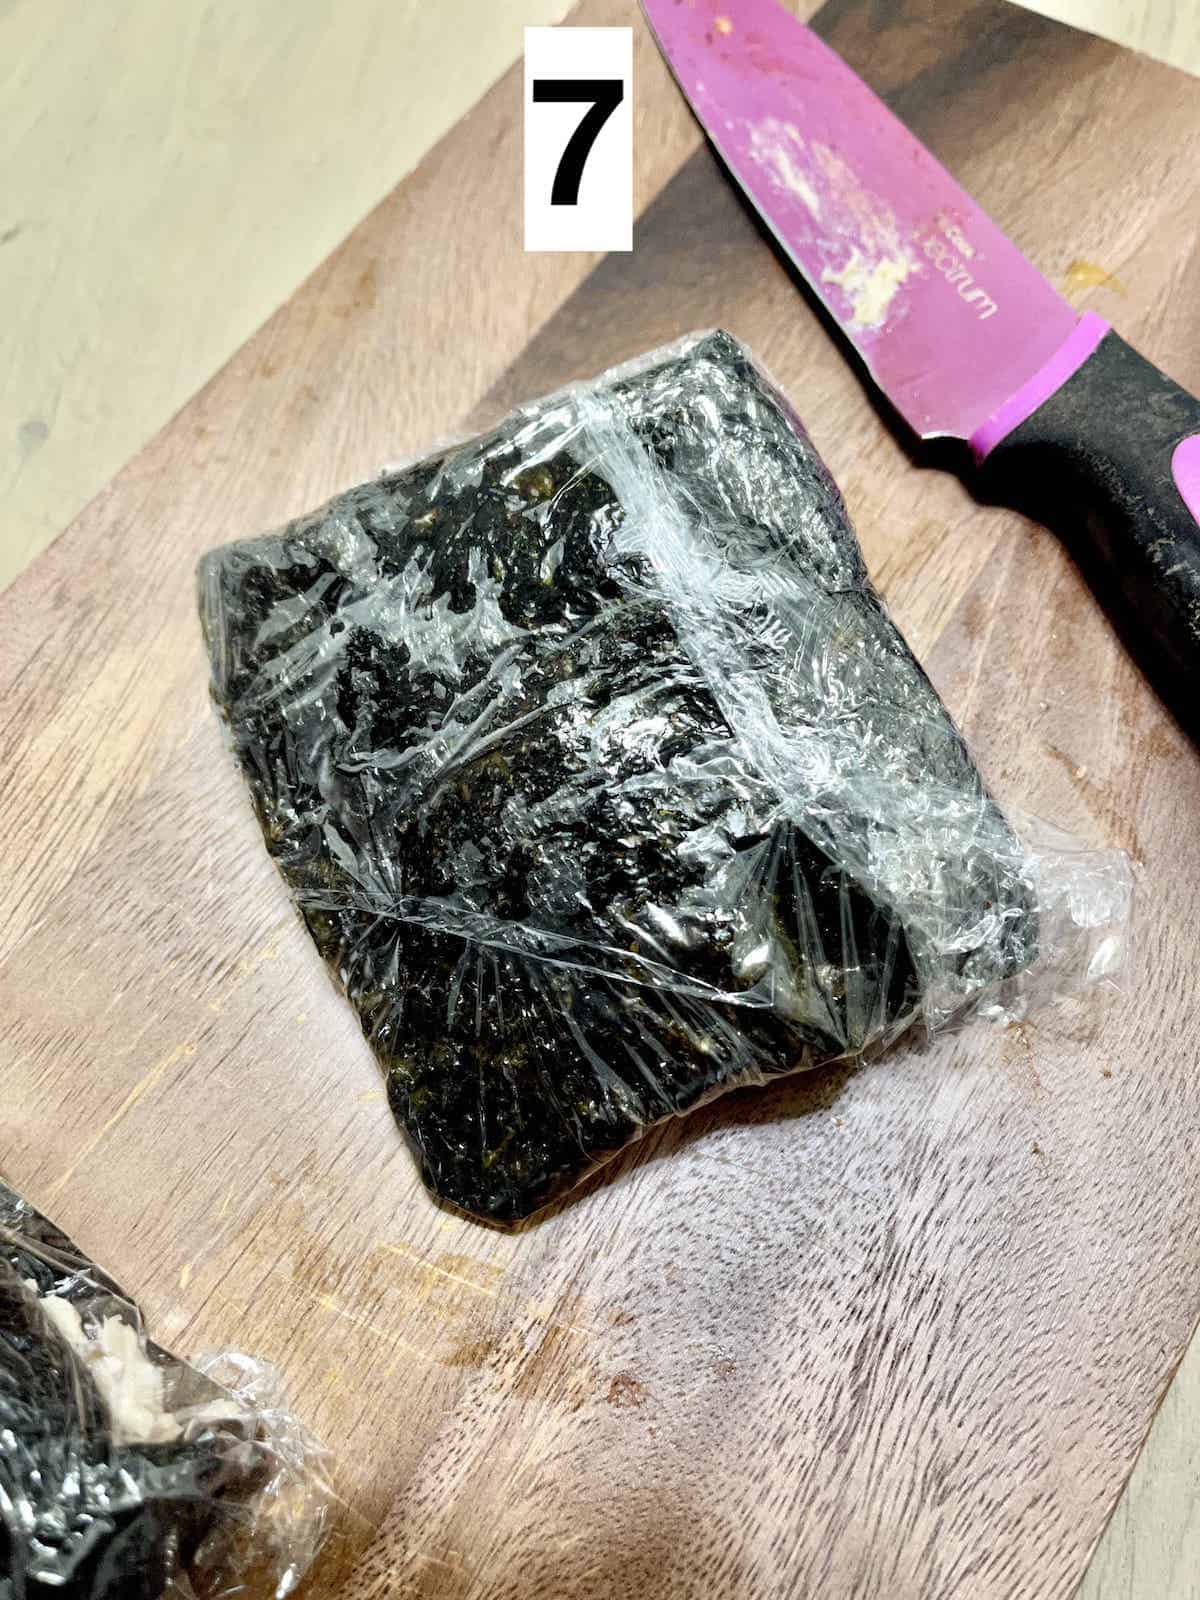 Korean seaweed sandwich wrapped in cling film next to a knife.